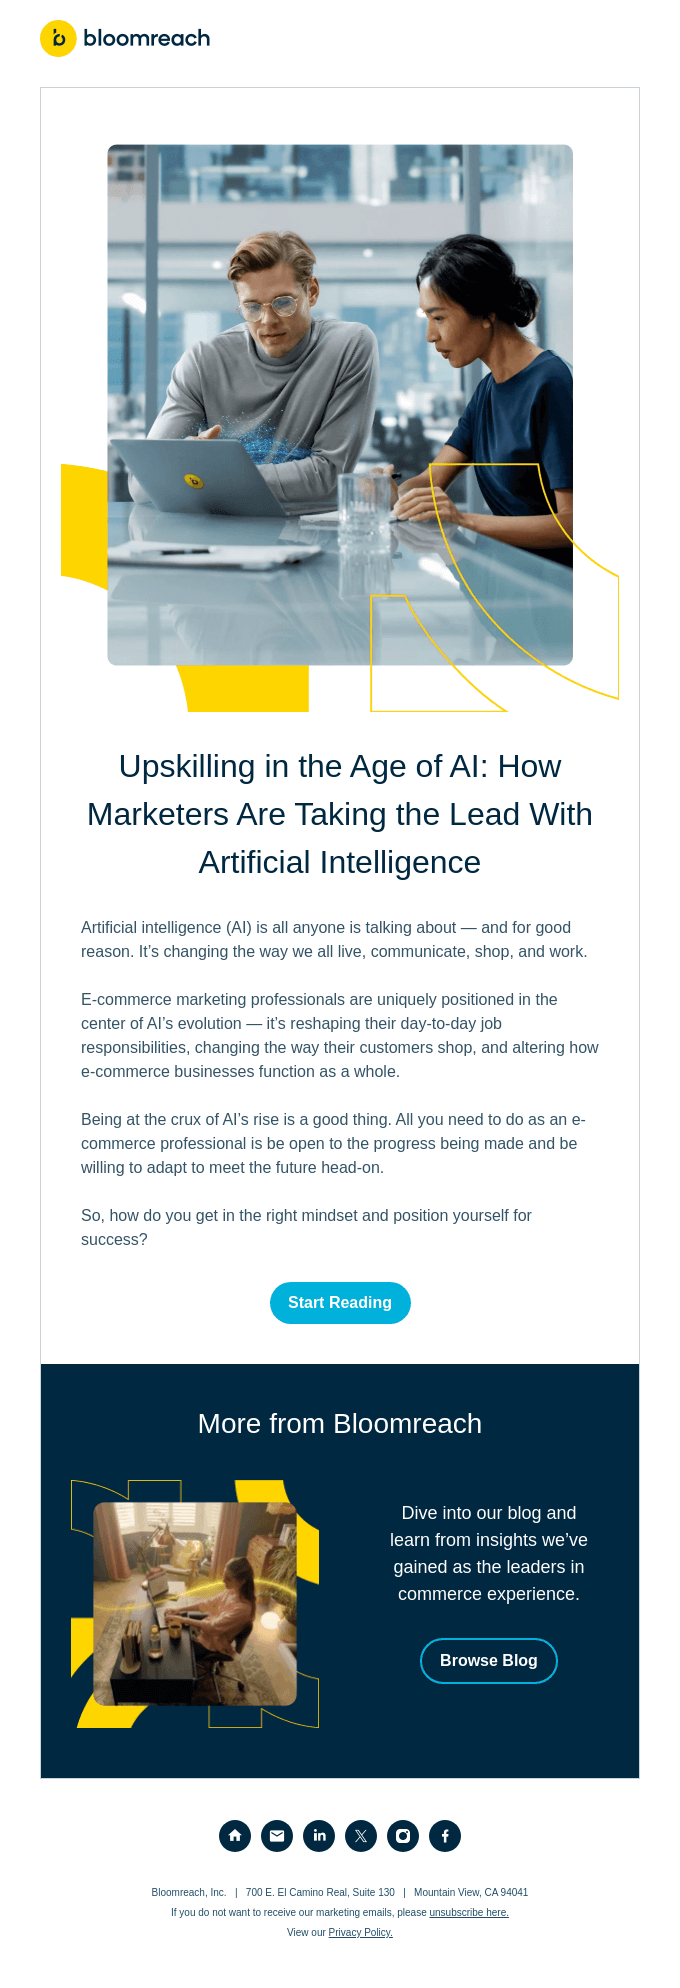 🏆 Upskilling in the age of AI